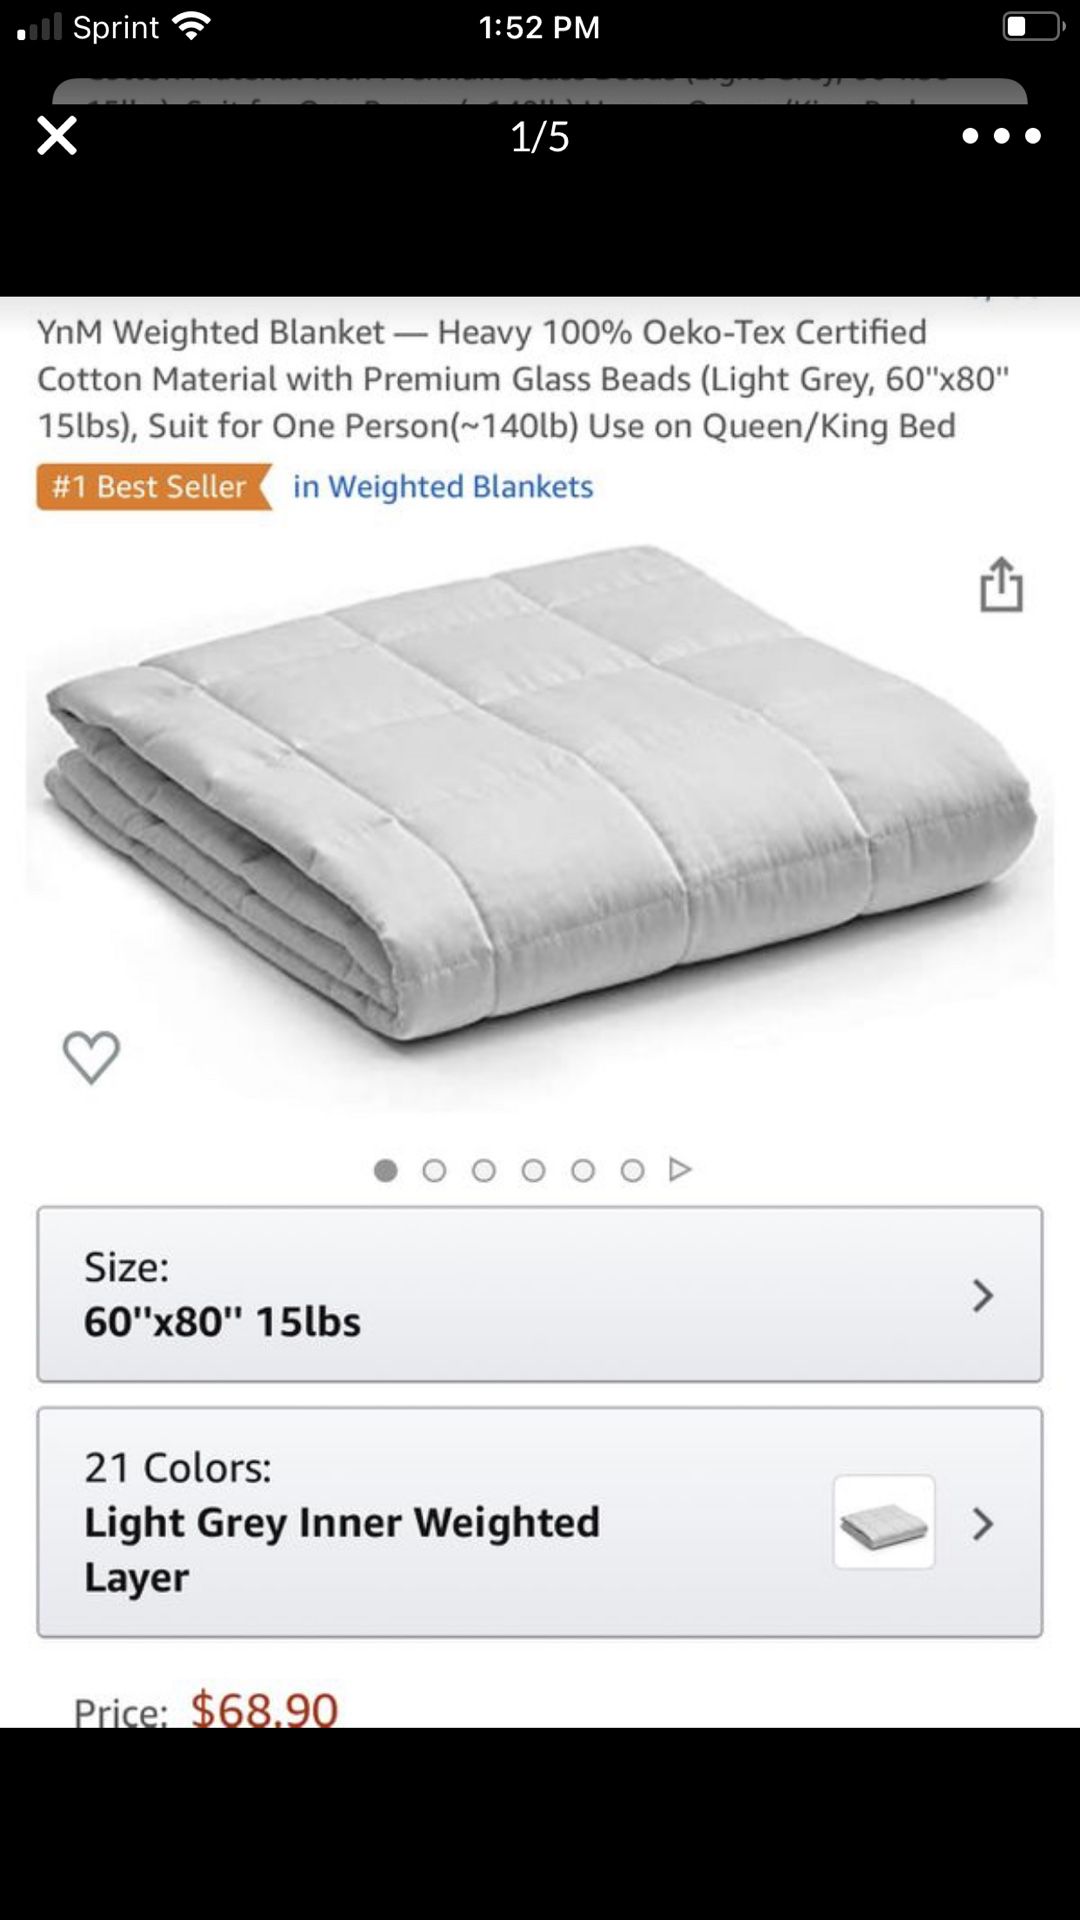 Weighted Blanket — BEDEXUT brand Twin Bed (Light Grey, 60''x80'' 15lbs), Suit for One Person(~140lb)